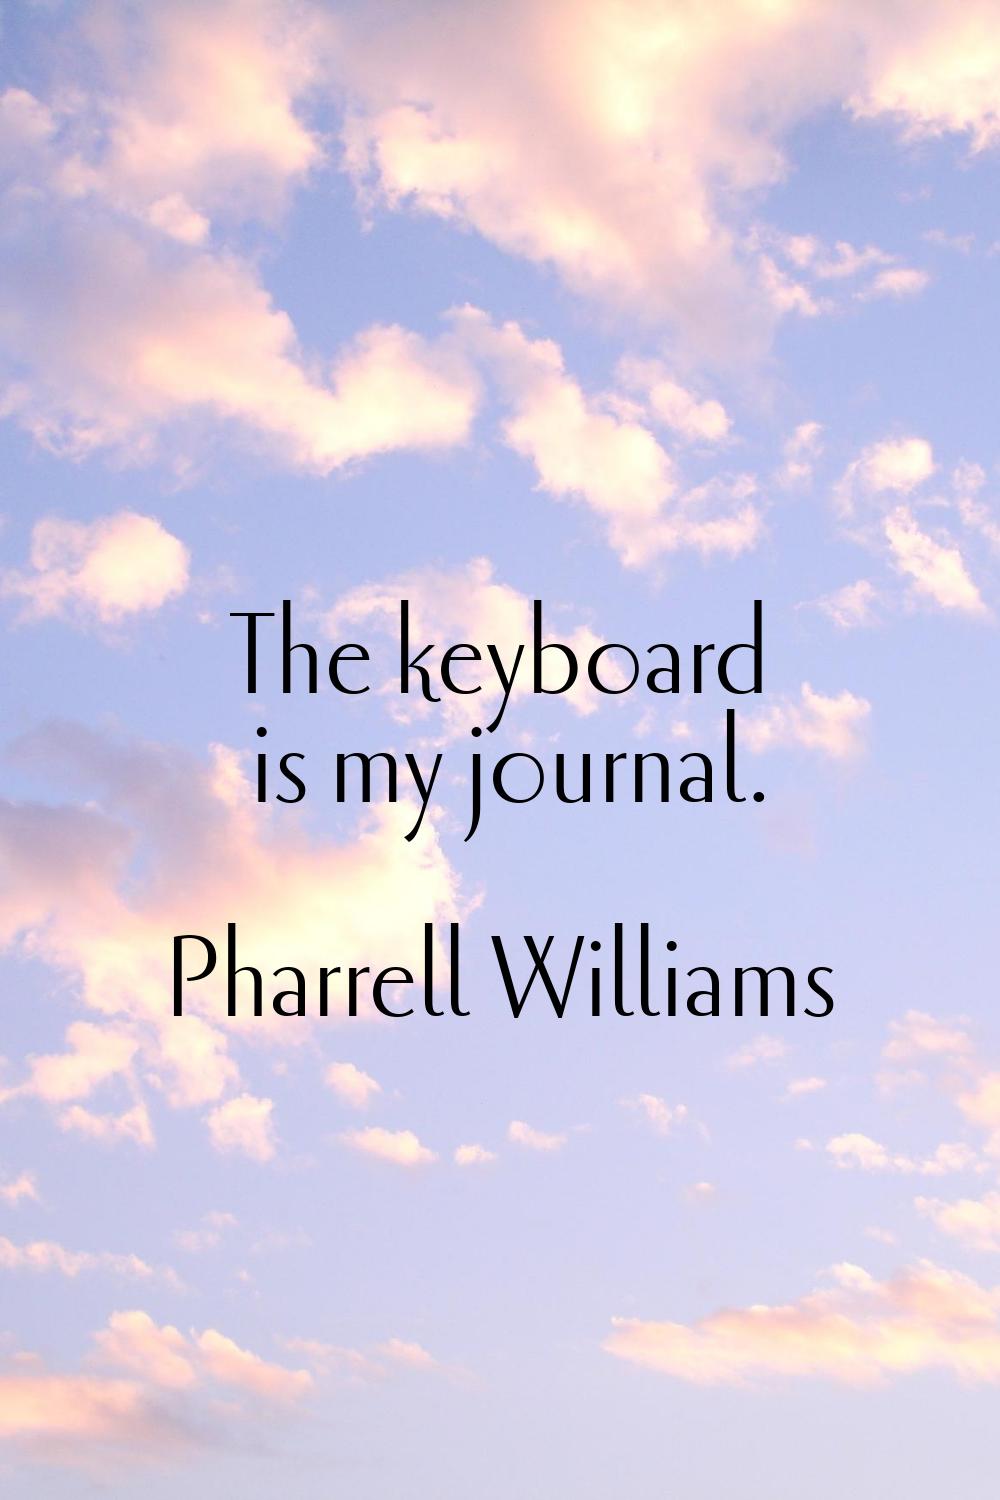 The keyboard is my journal.